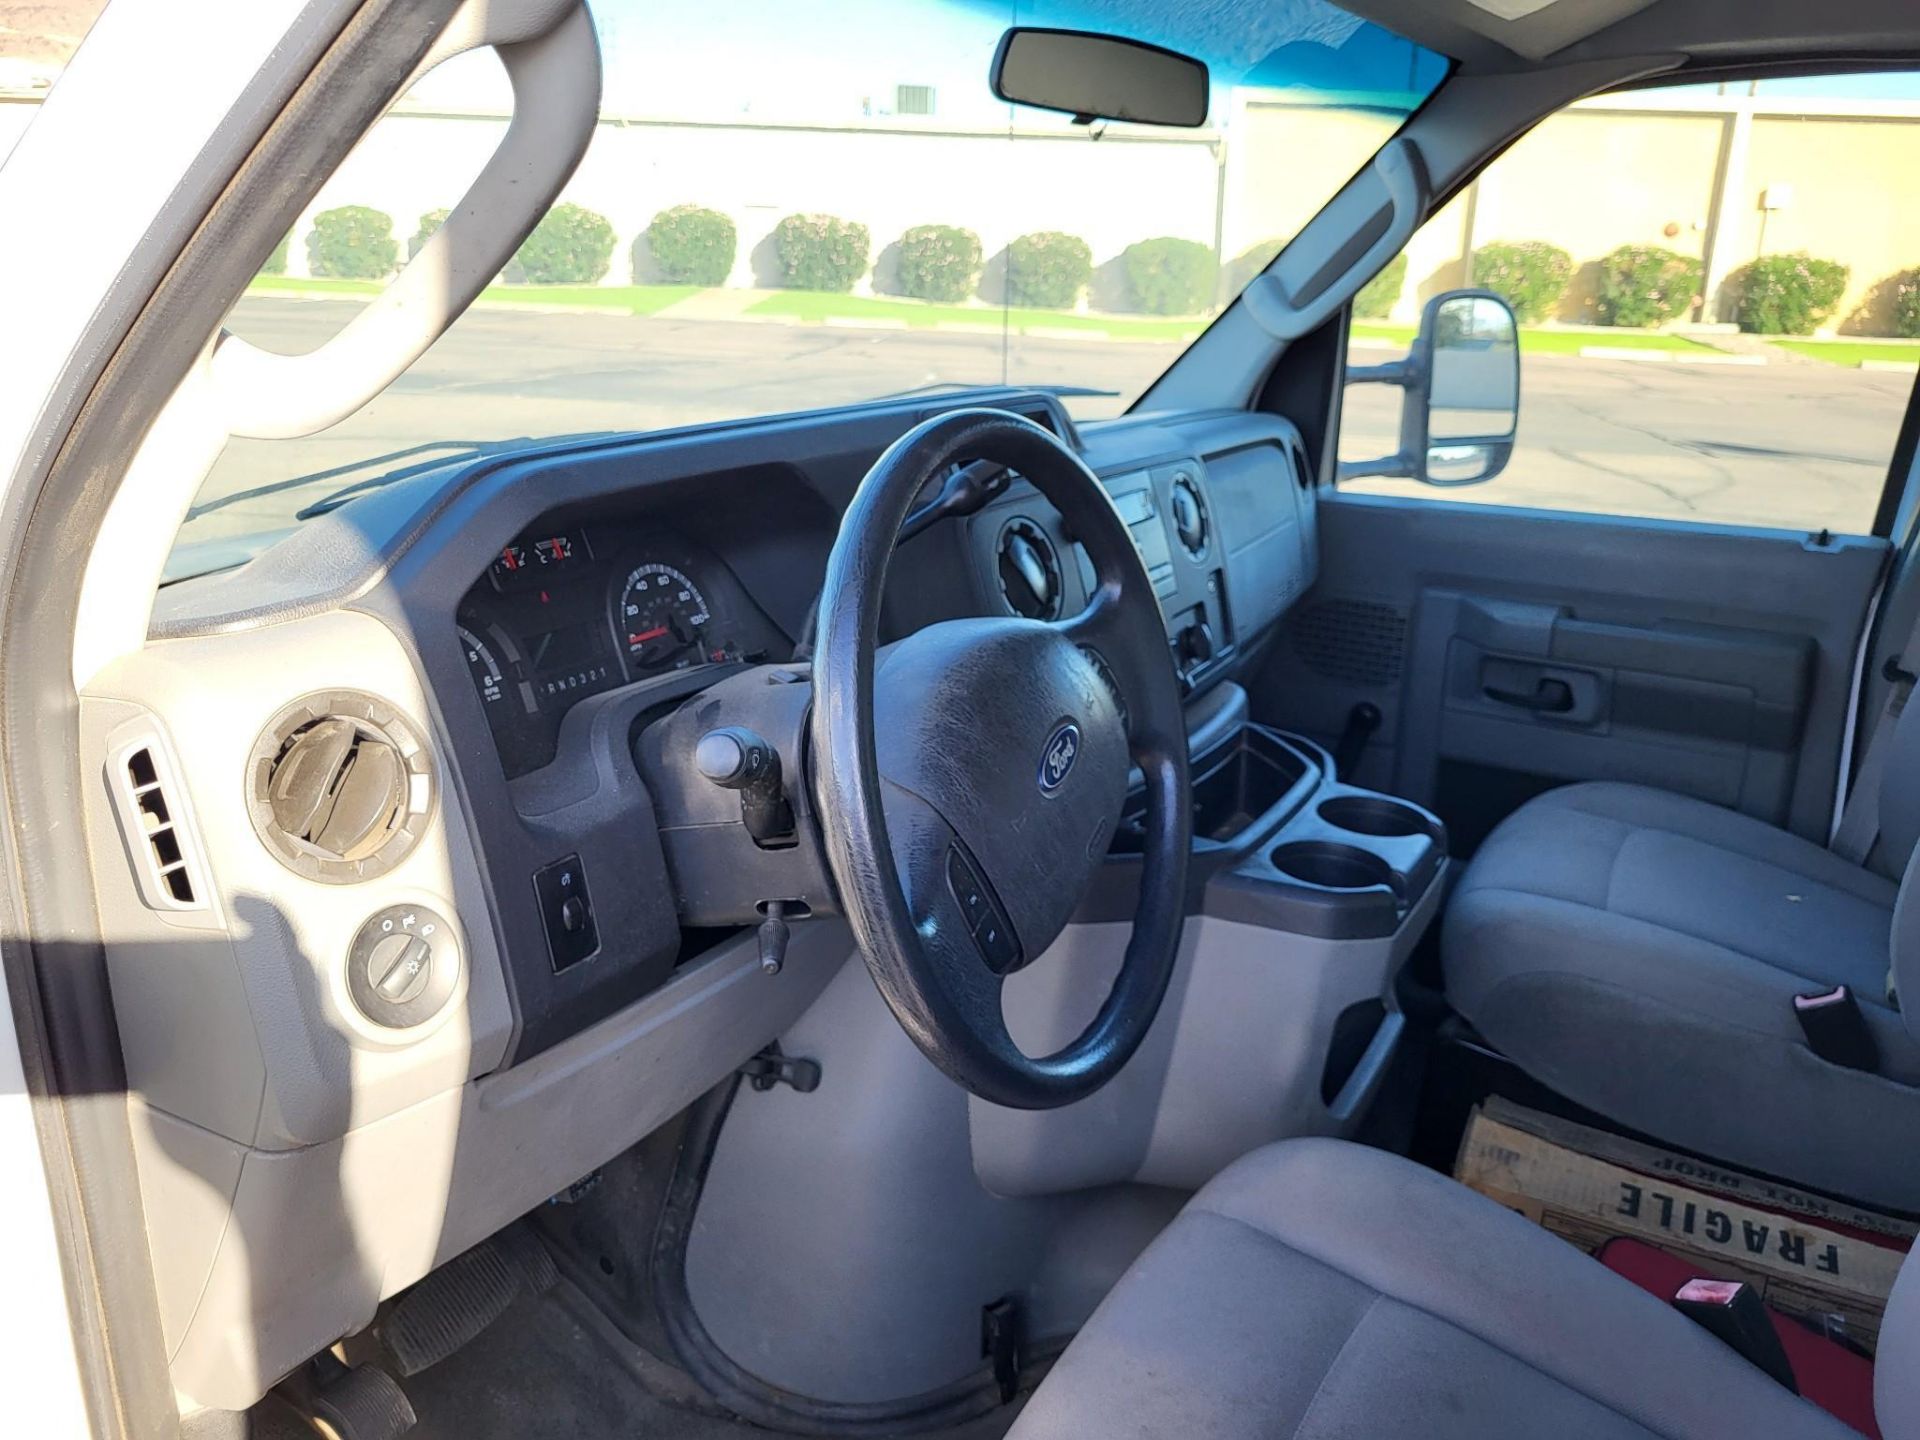 FORD E-350 SUPER DUTY BOX TRUCK, 2013 - UNDER 50K MILES - Image 7 of 22